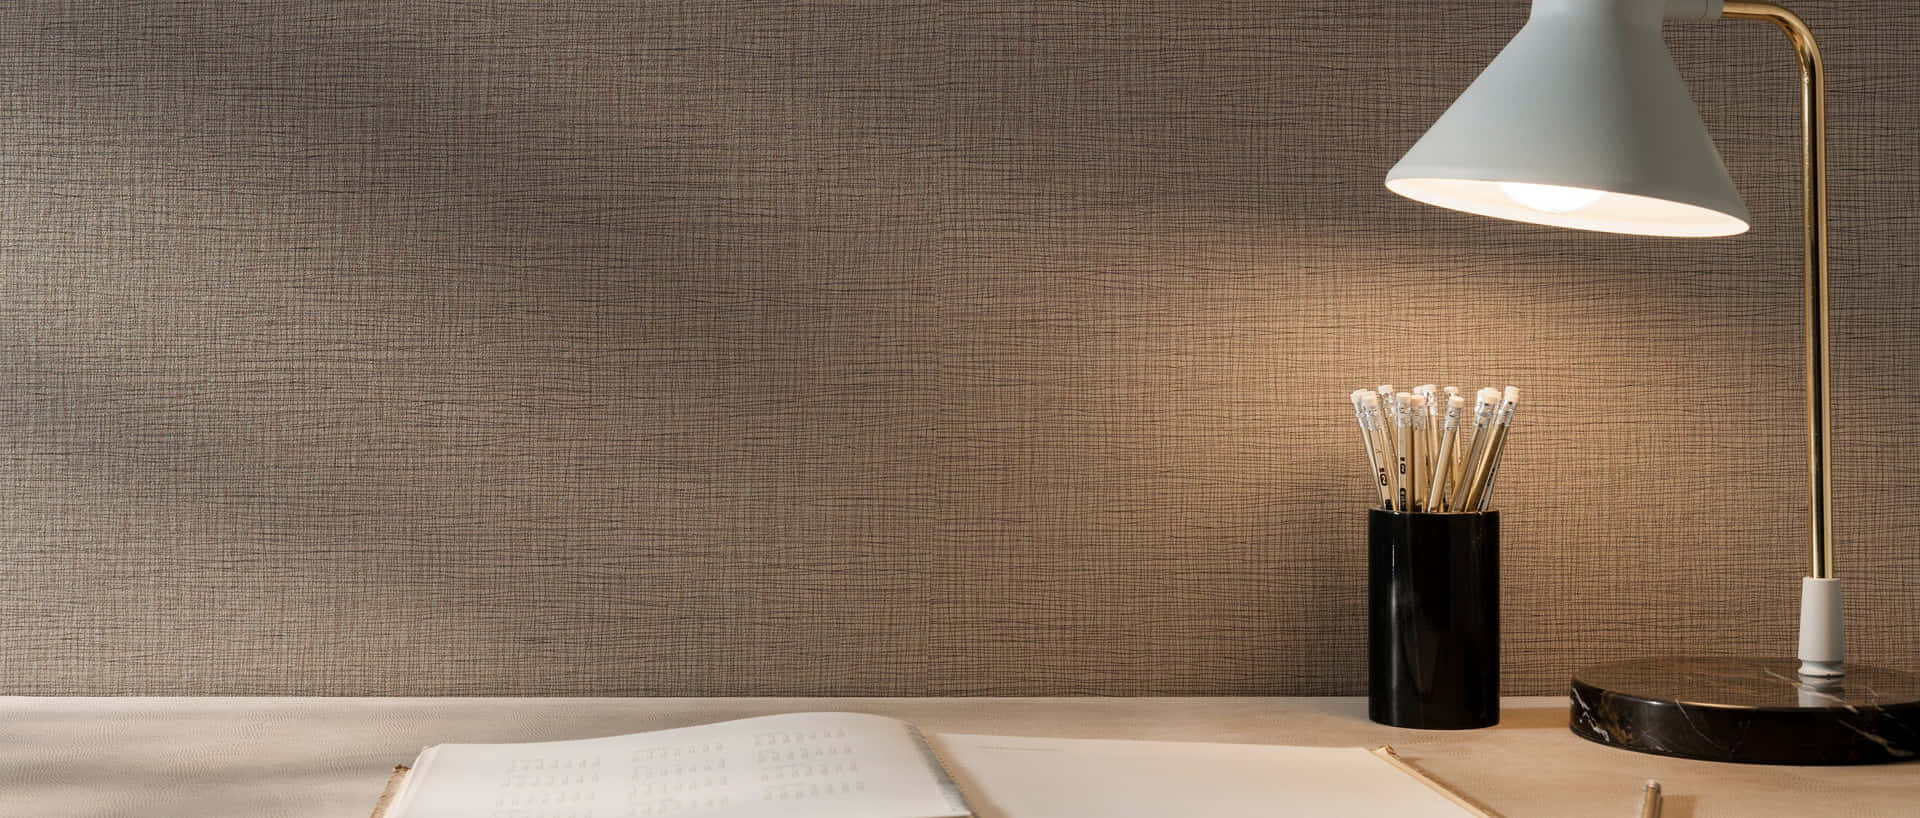 Transform Your Office Space with Highly Functional and Well-Decorated Wall spaces Wallpaper